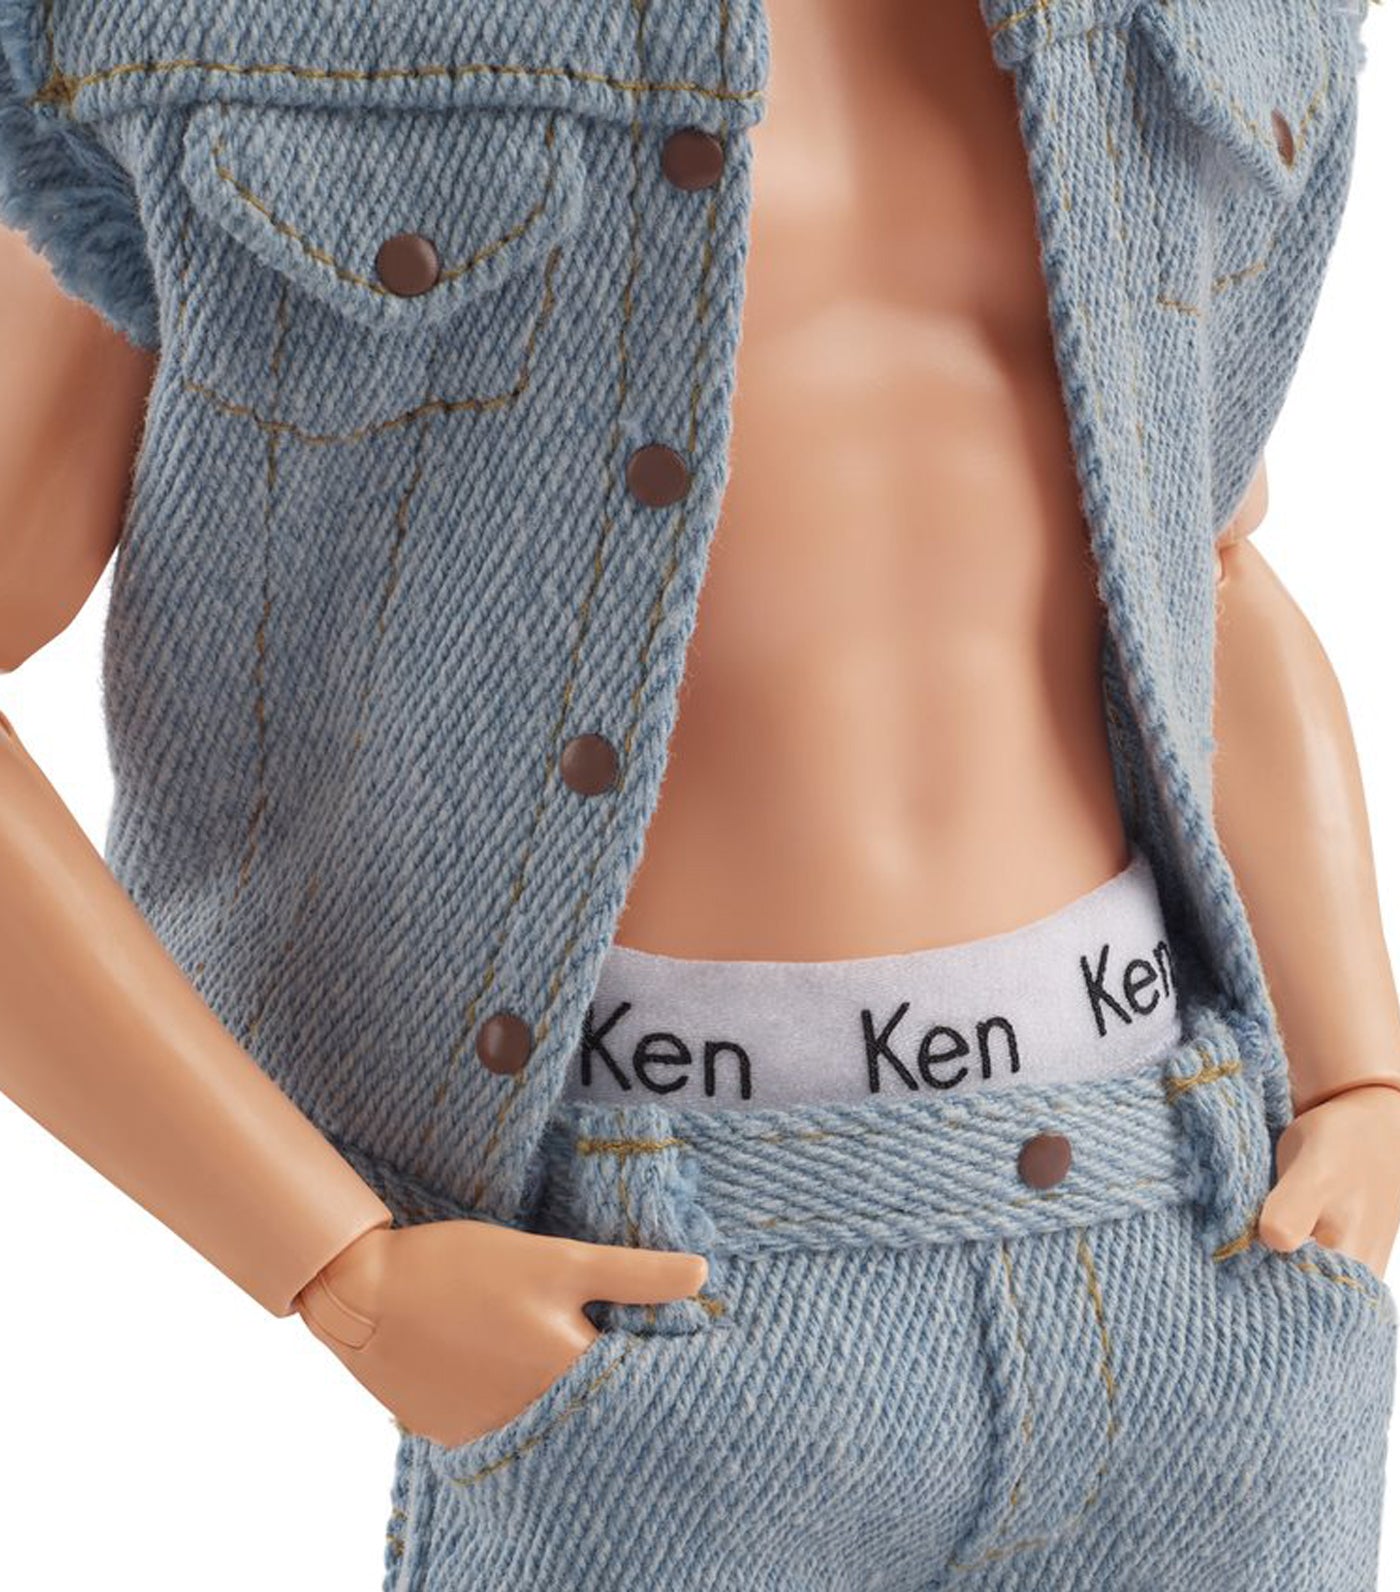 The Movie Ken Doll - First Look Outfit